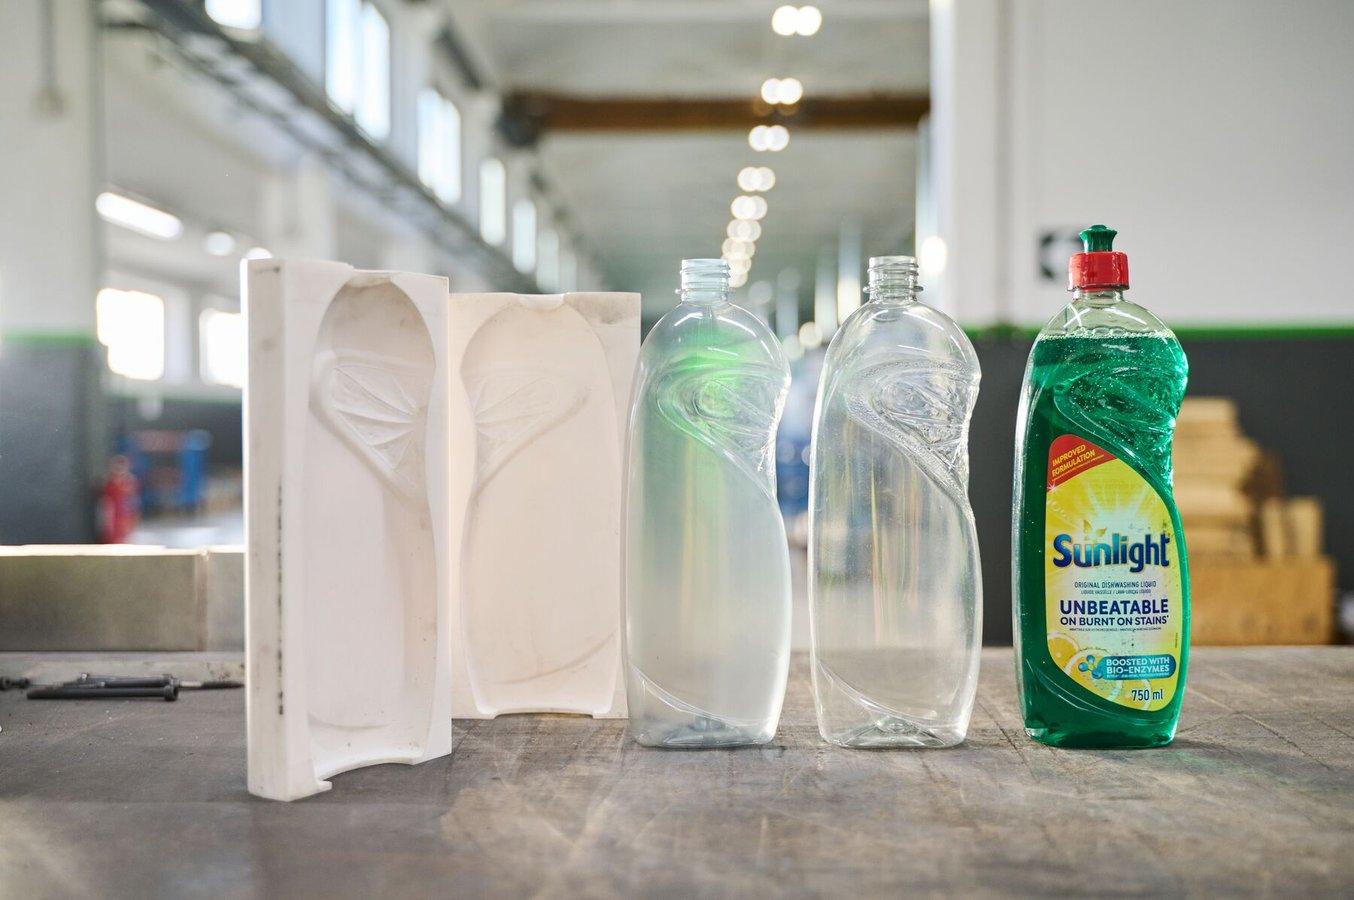 From left to right: the two-part mold 3D printed with Rigid 10K Resin, a bottle produced with the mold 3D printed with Rigid 10K Resin, a bottle produced with a metal mold, and a labeled prototype bottle for customer testing.